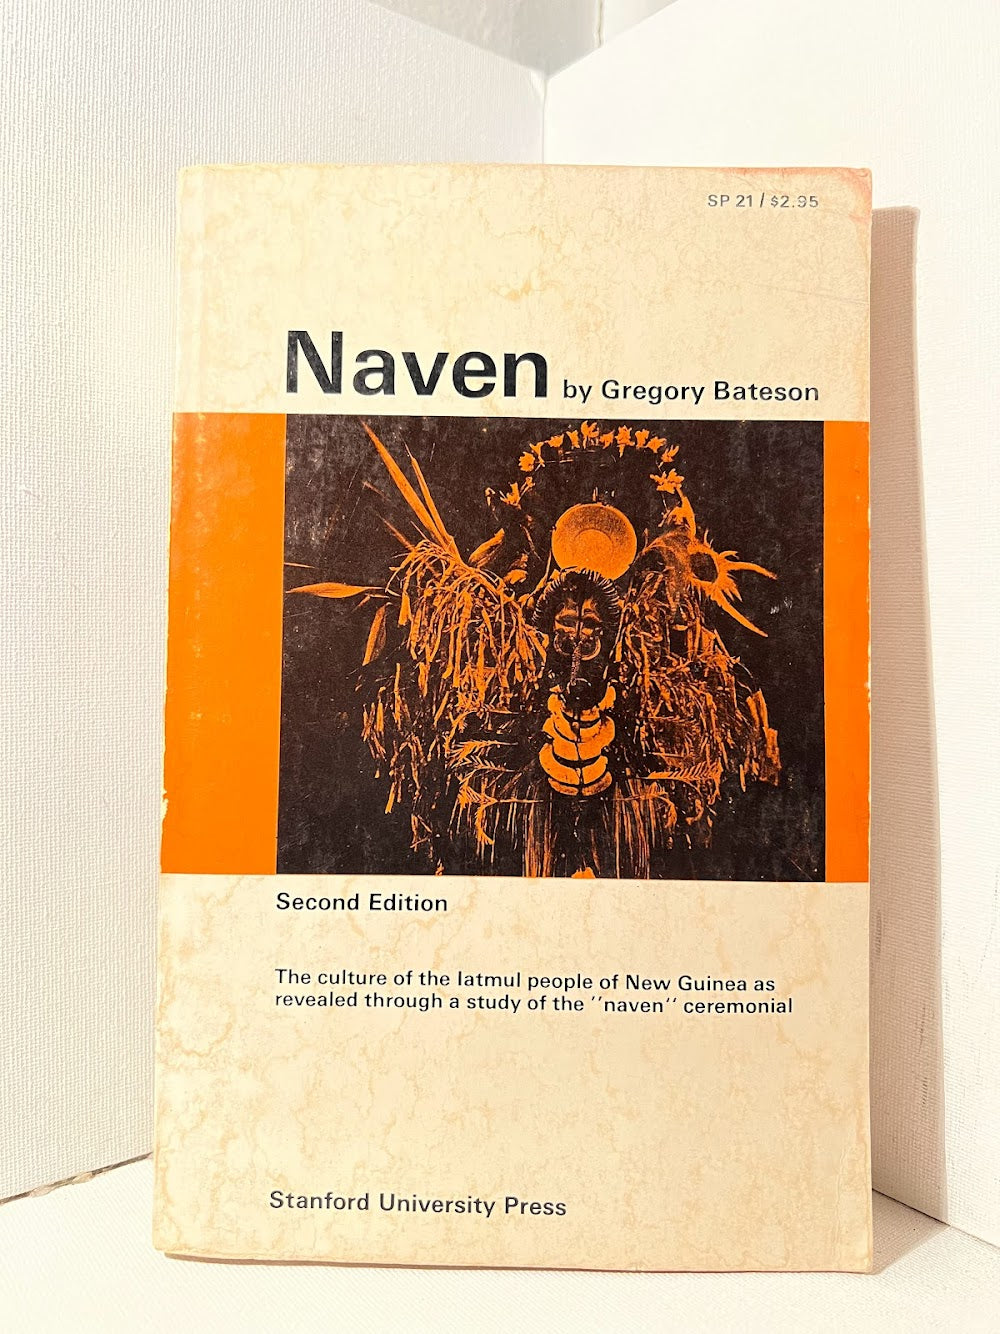 Naven by Gregory Bateson